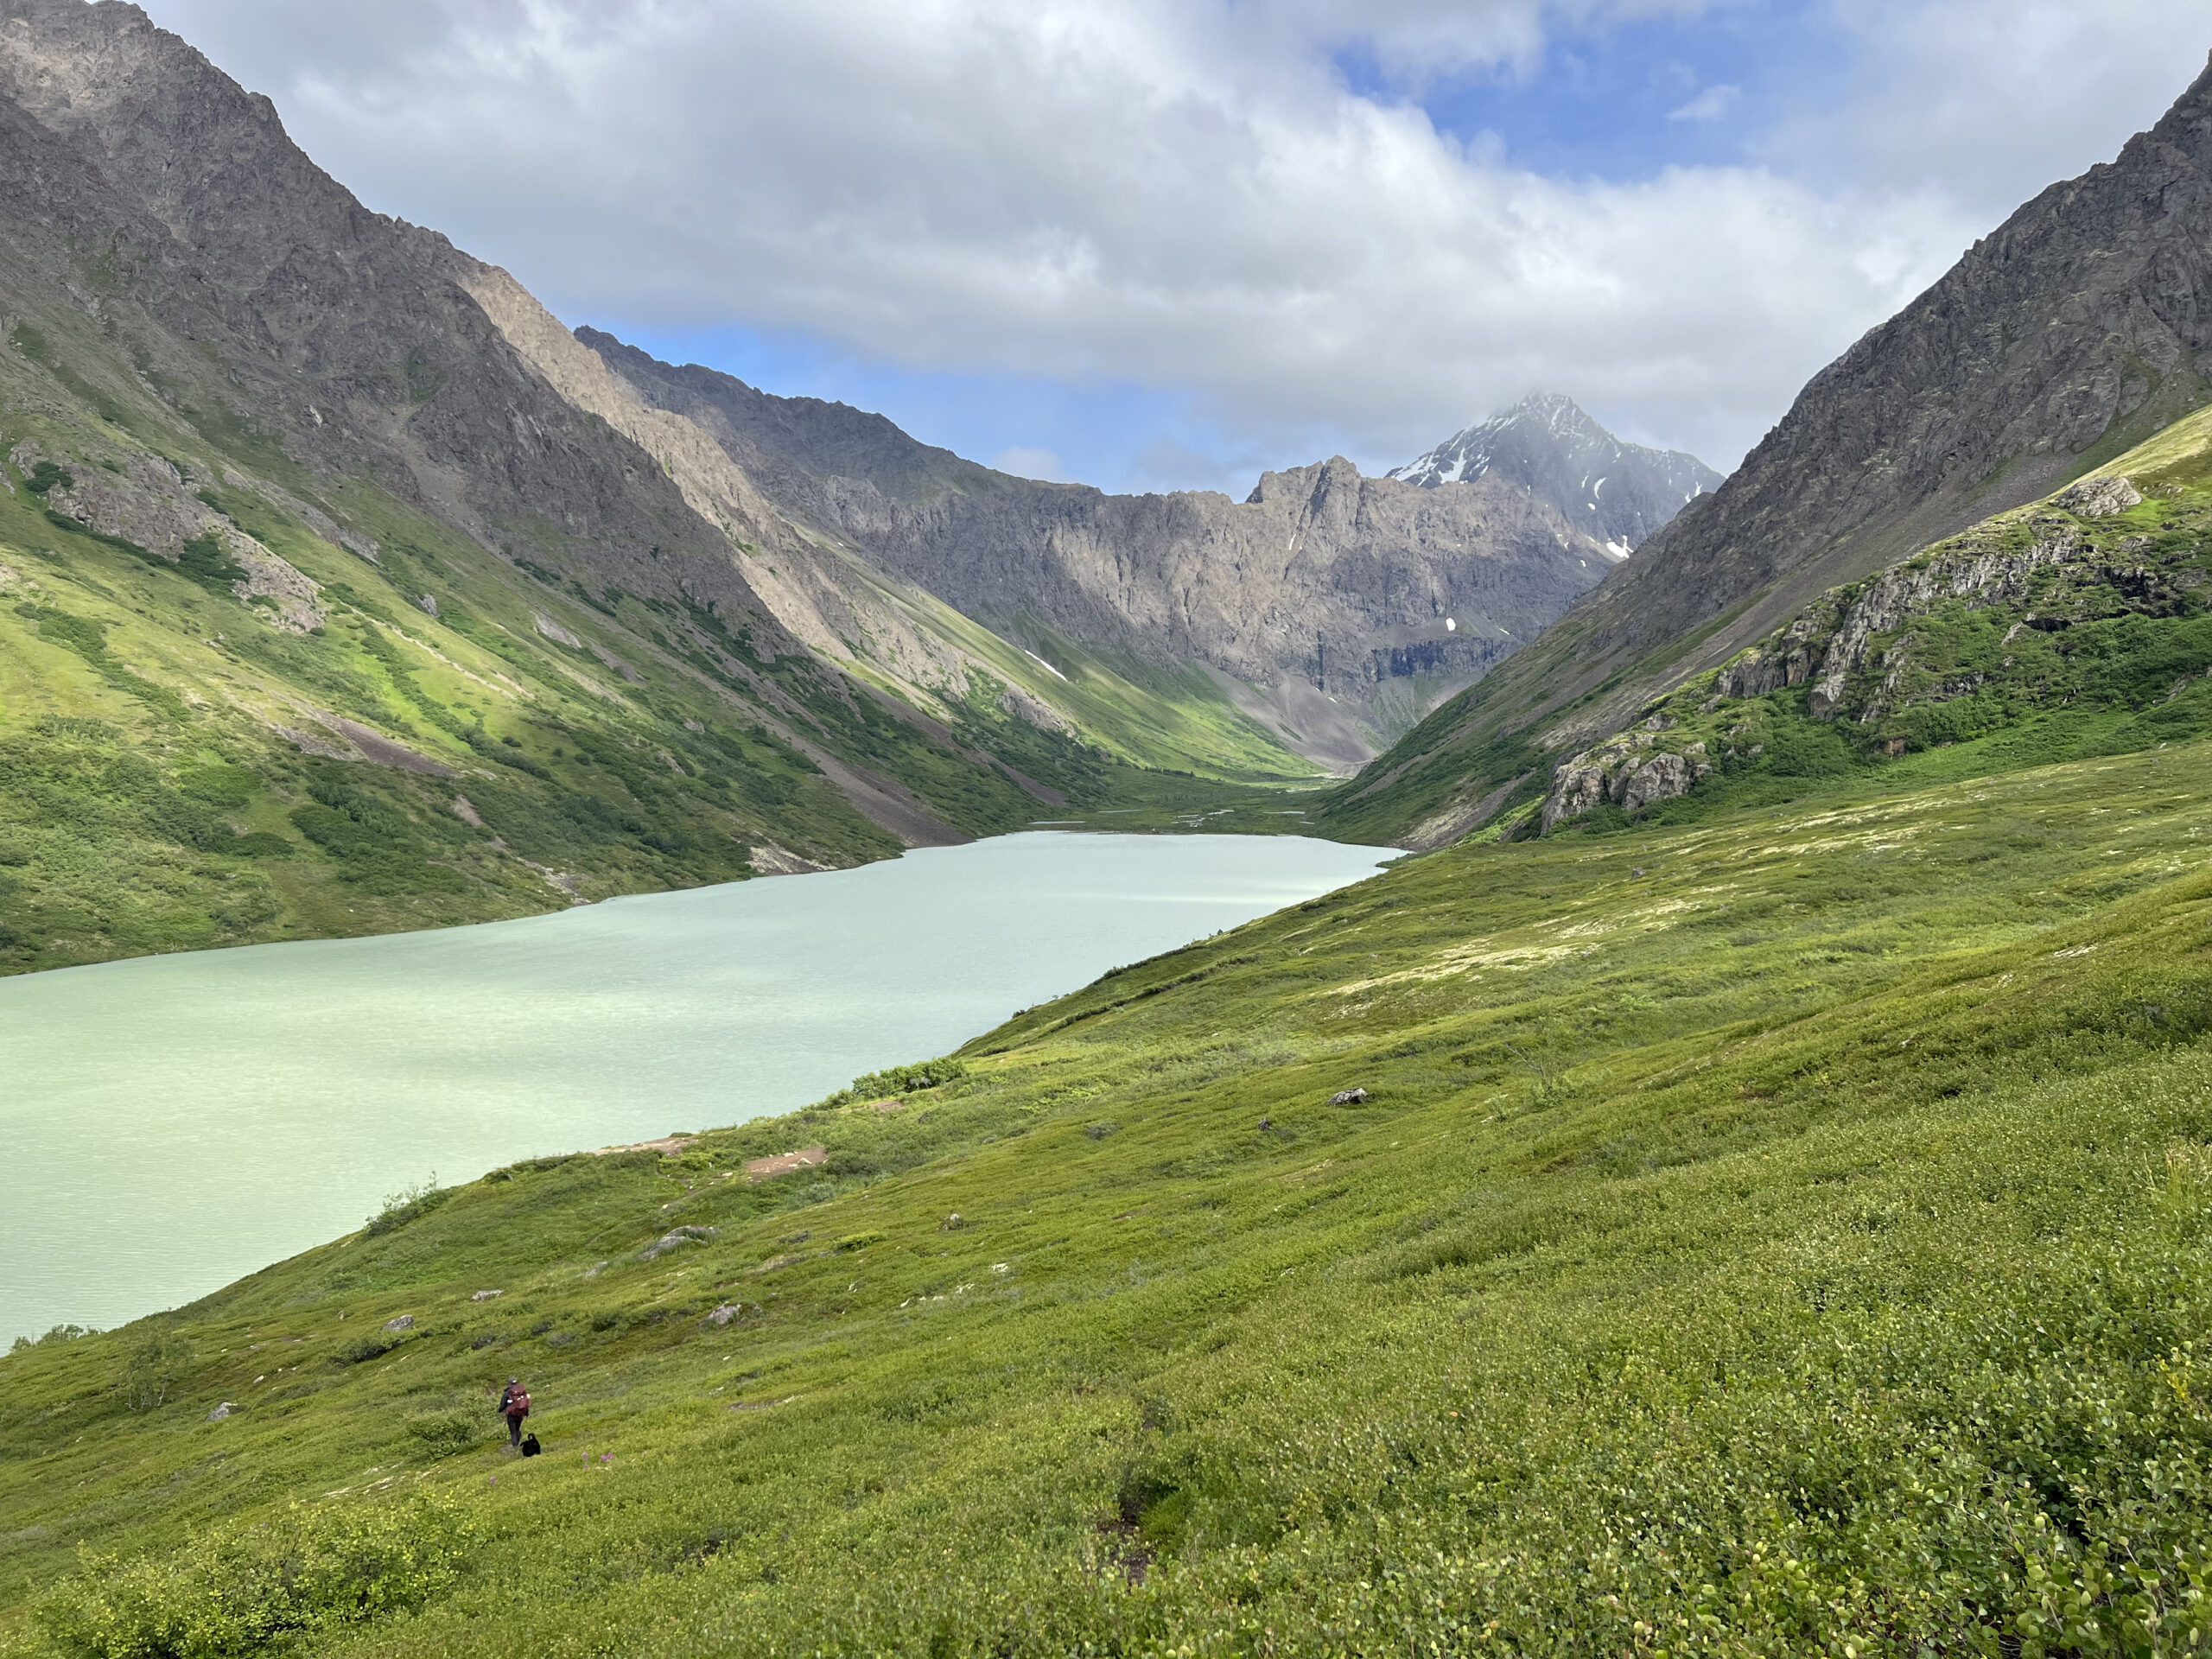 Landscape photo showing a brown lake in a mountainous valley.